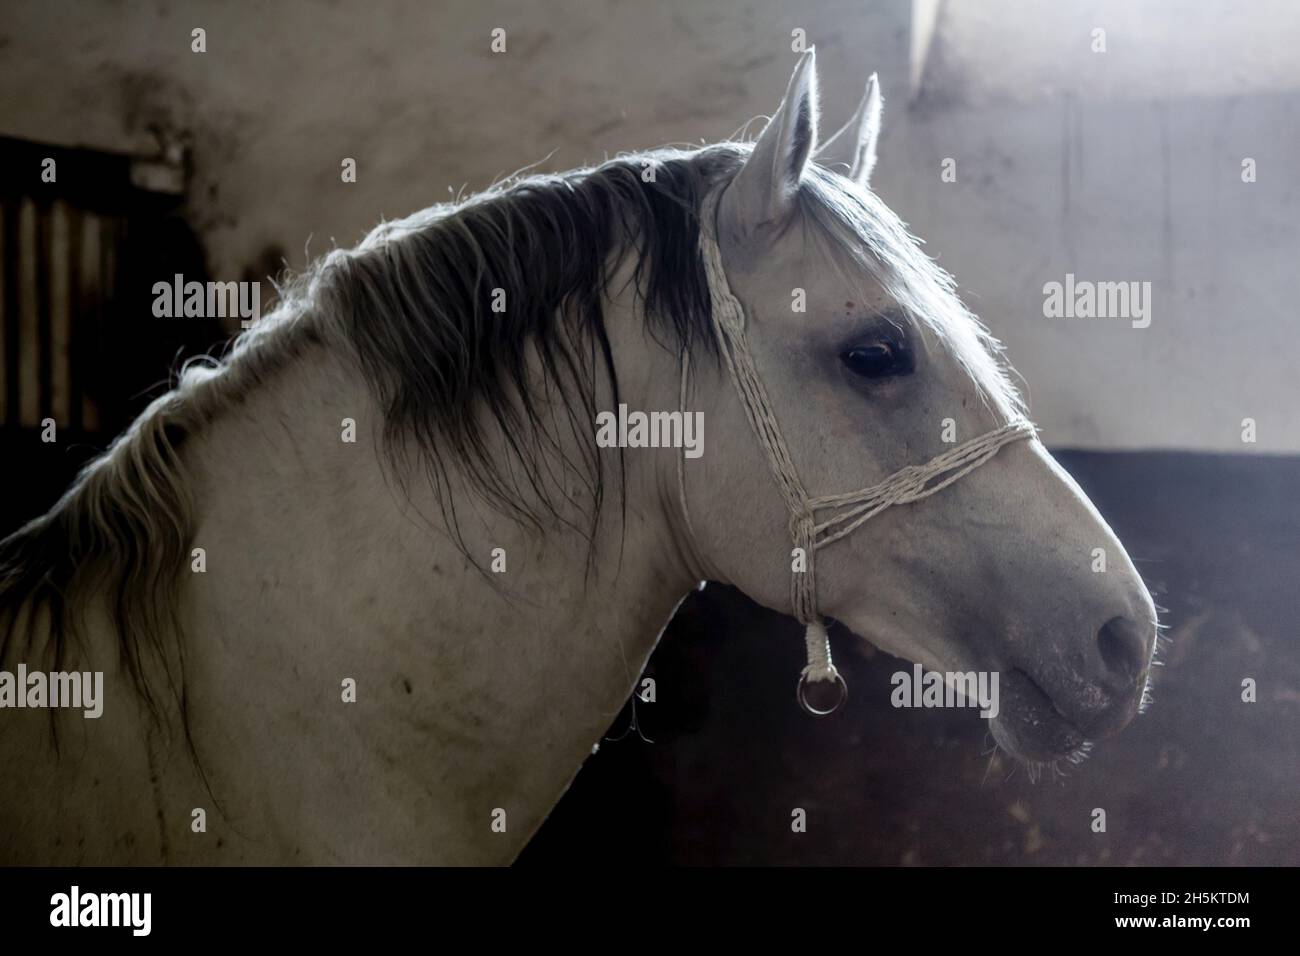 A Lipizzaner horse in it's stable. Stock Photo